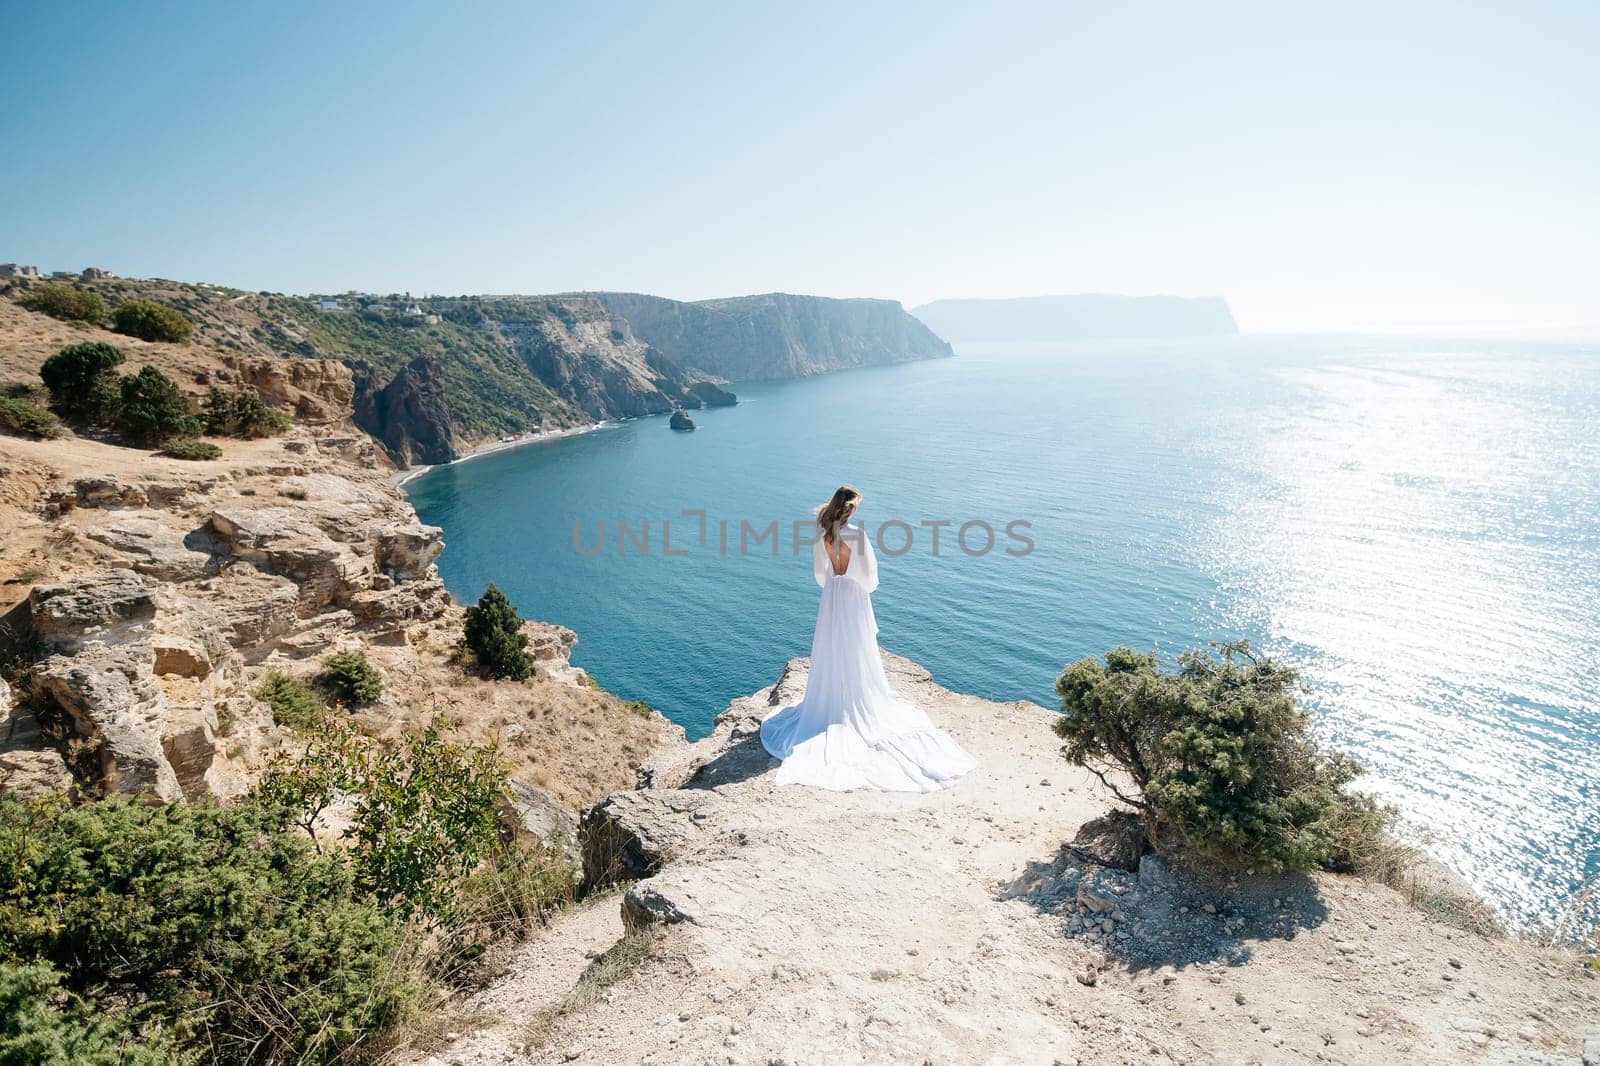 woman white dress stands on a rocky cliff overlooking the ocean. The scene is serene and peaceful, with the woman's dress billowing in the wind. by Matiunina